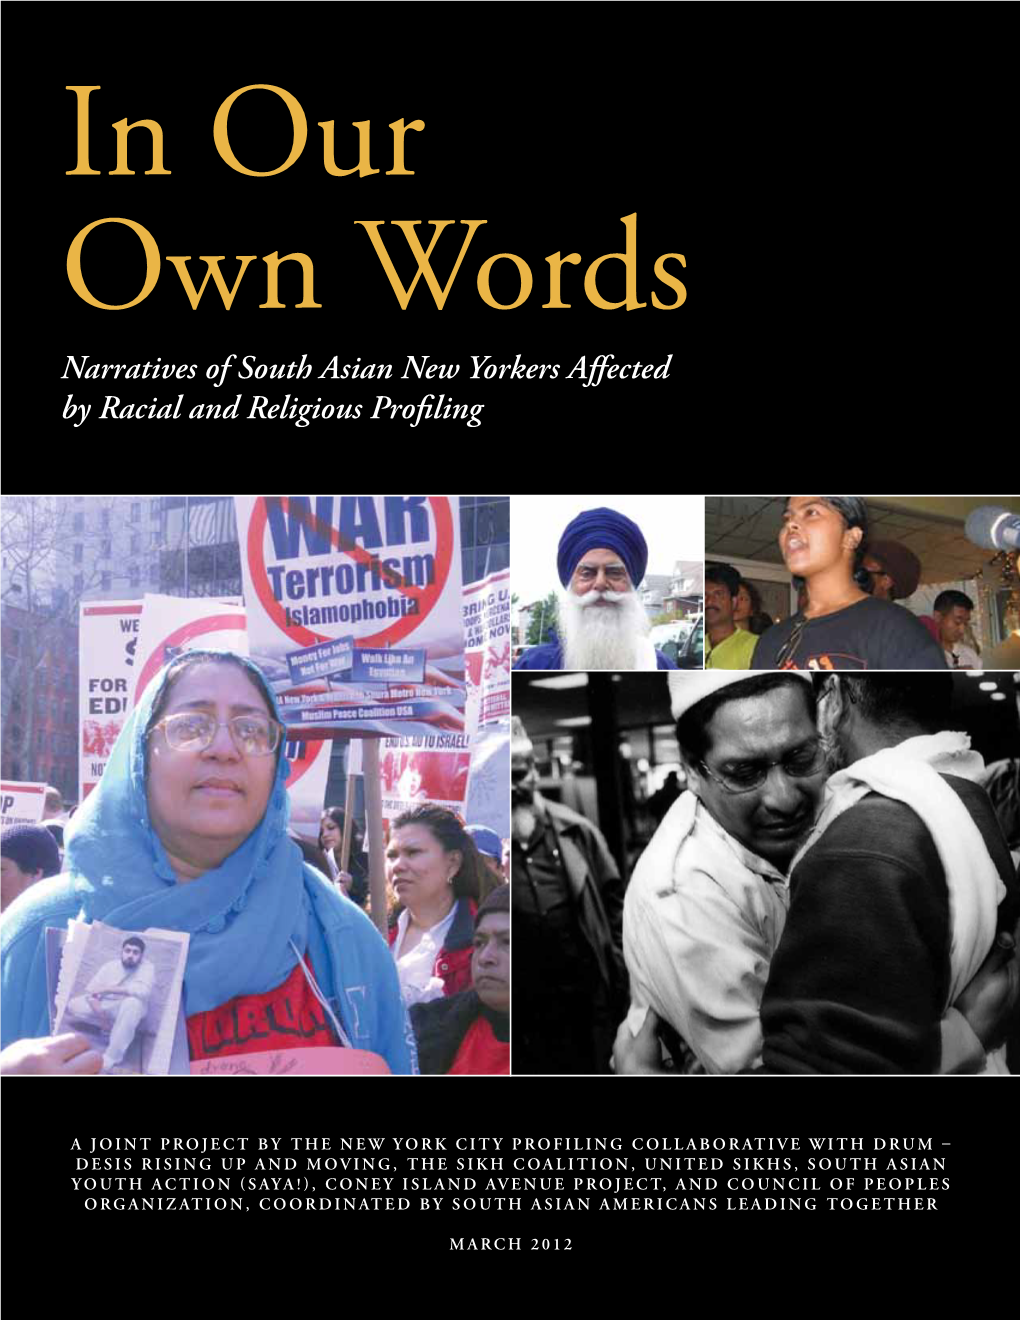 In Our Own Words: Narratives of South Asian New Yorkers Affected By